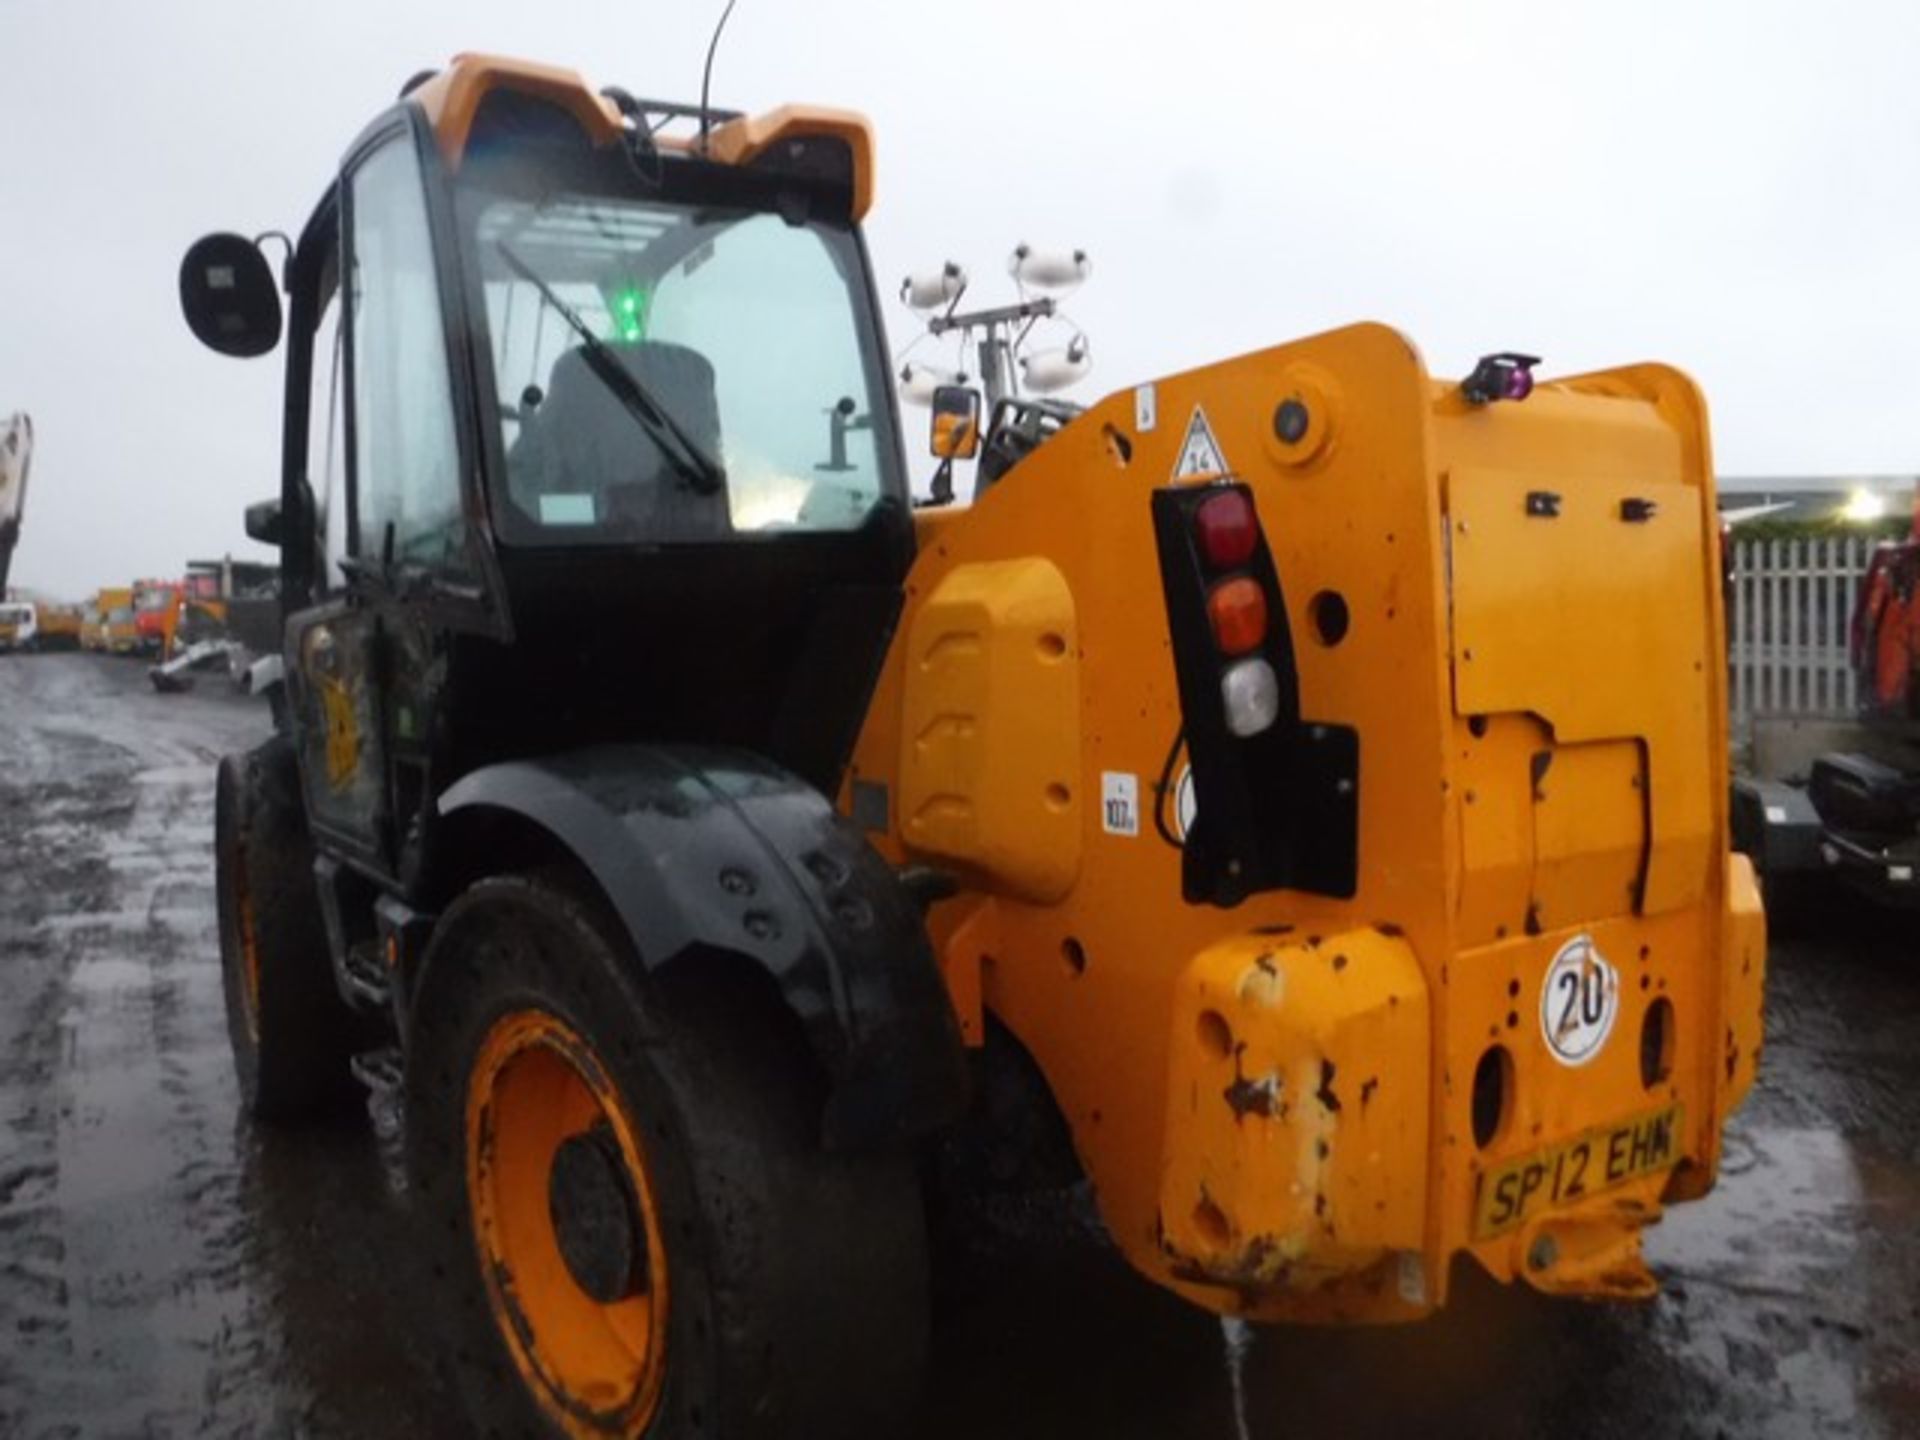 2012 JCB 550 - 80 WASTE SPECIAL TELESCOPIC HANDLER, 8870hrs (NOT VERIFIED) ON SOLID TYRES - Image 8 of 13